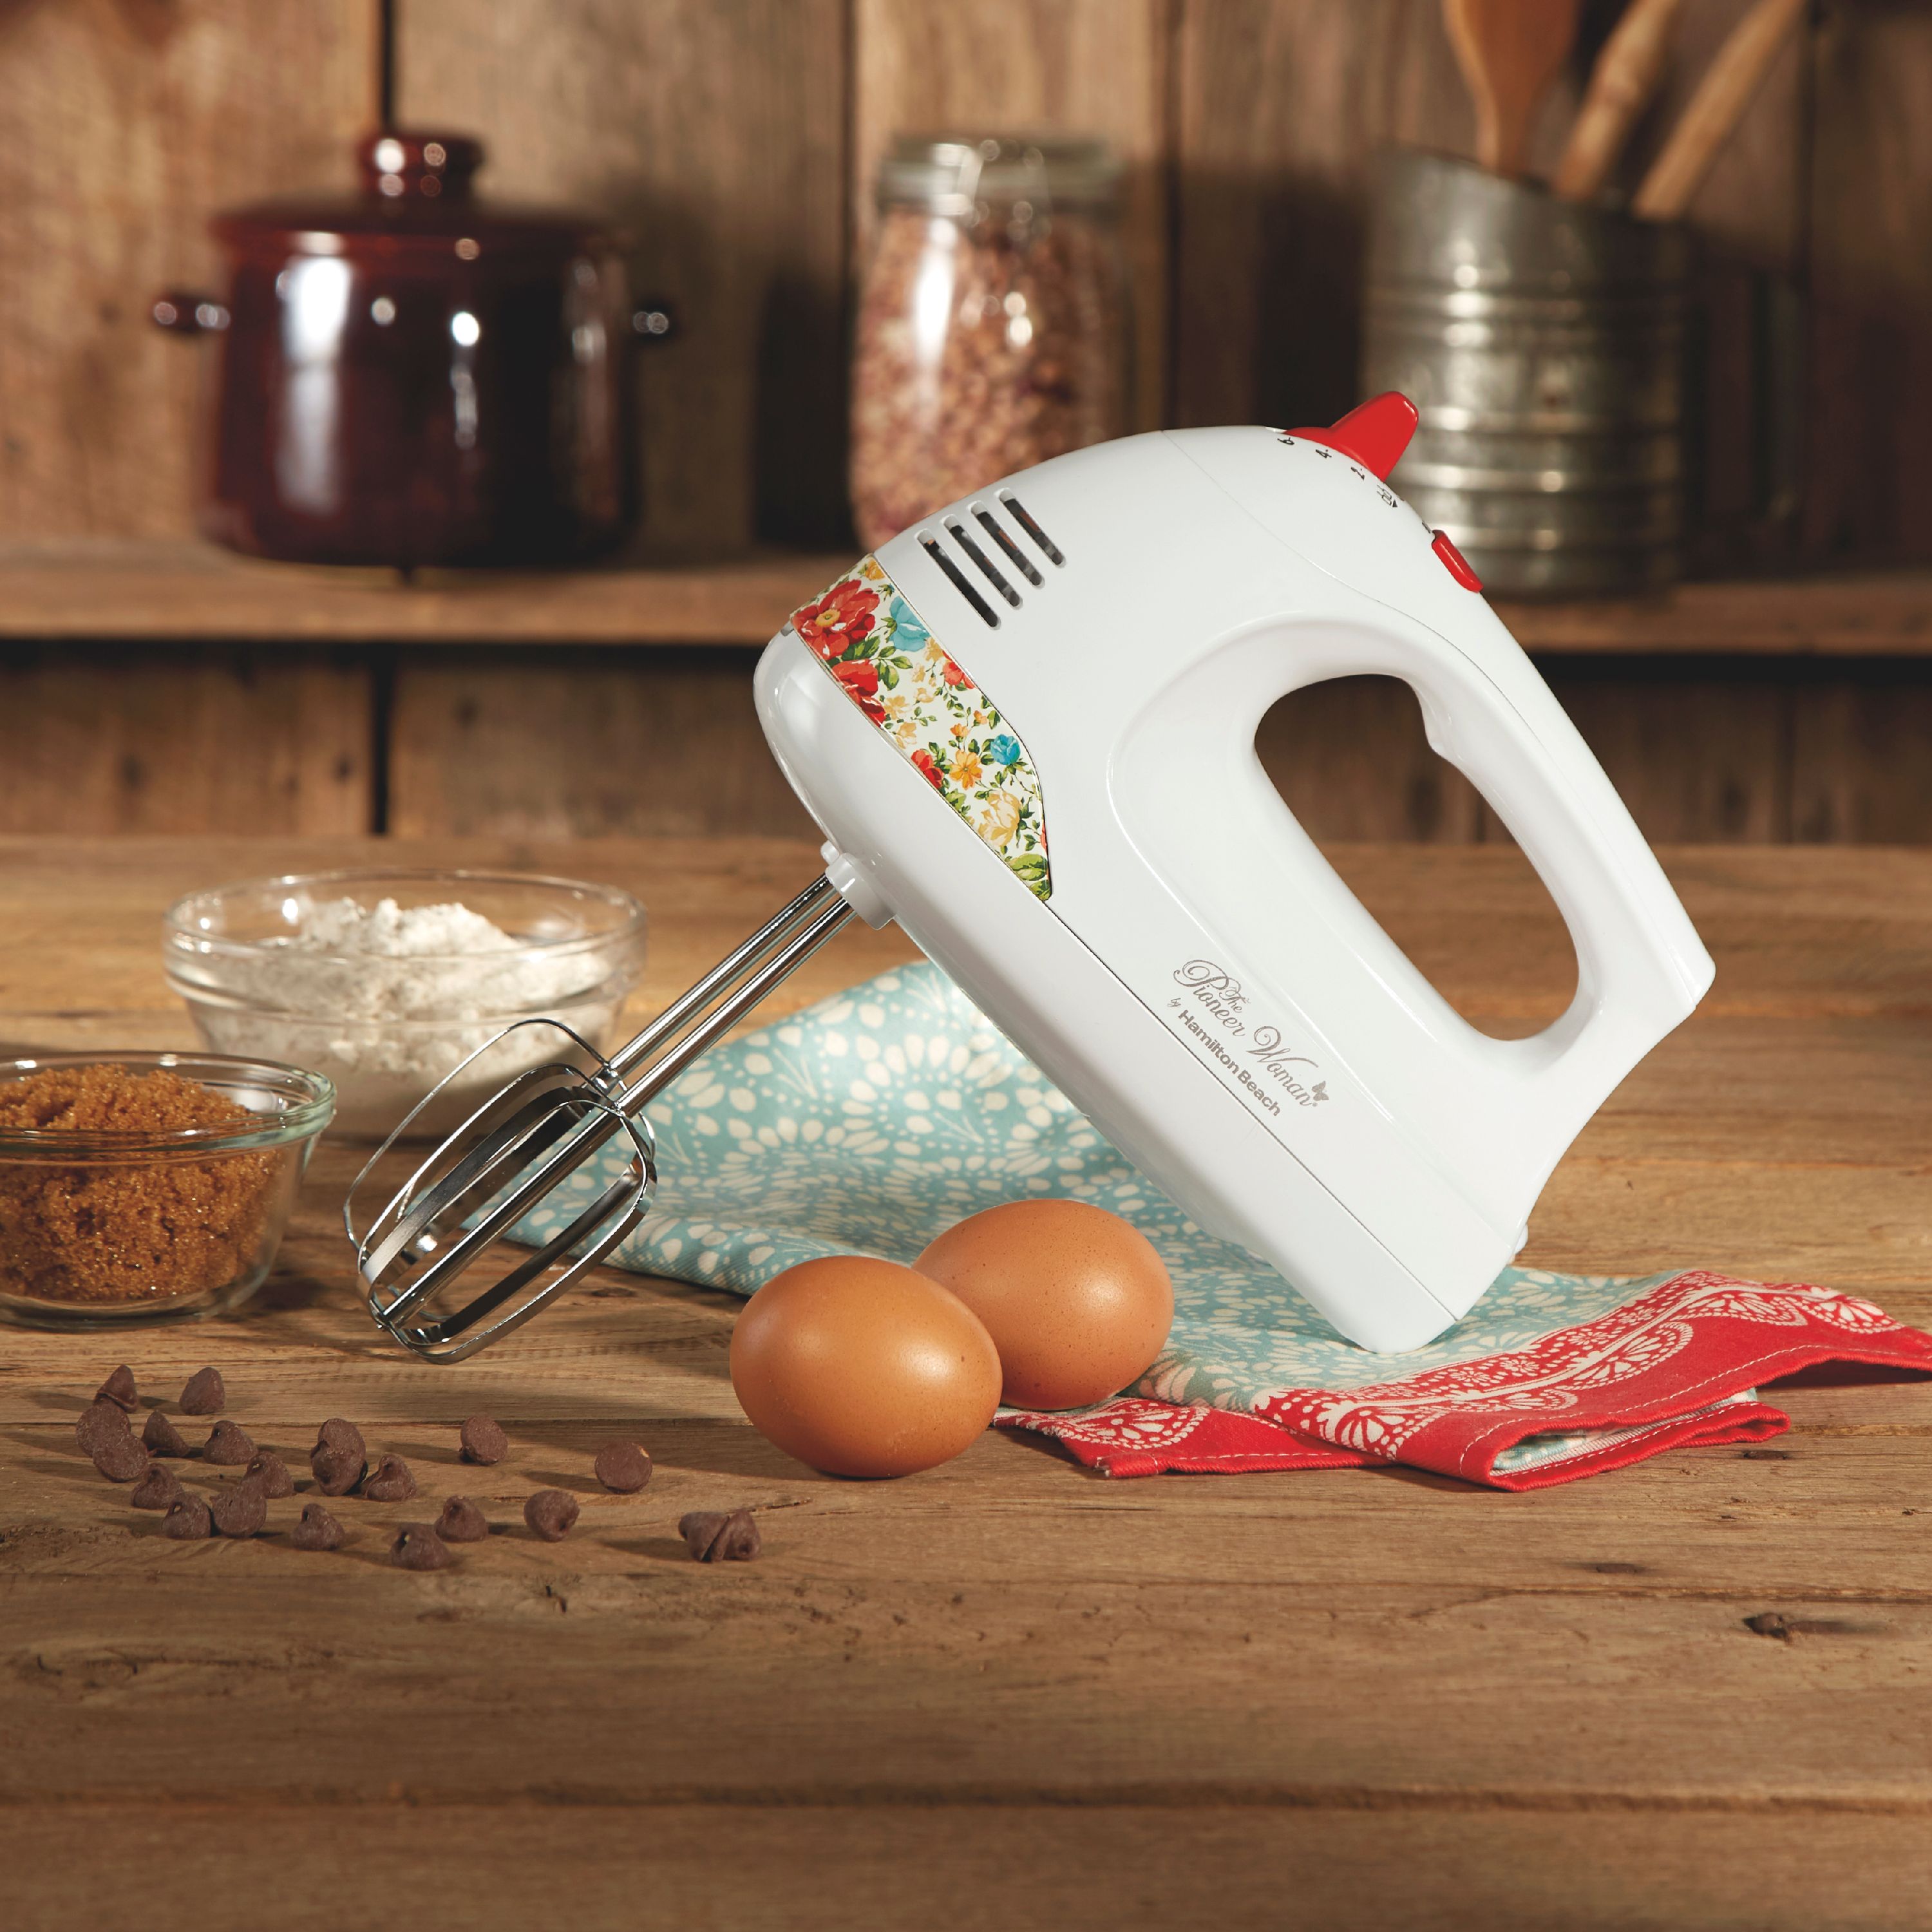 The Pioneer Woman 6-Speed Hand Mixer with Vintage Floral Design and Snap-On Case - image 3 of 7